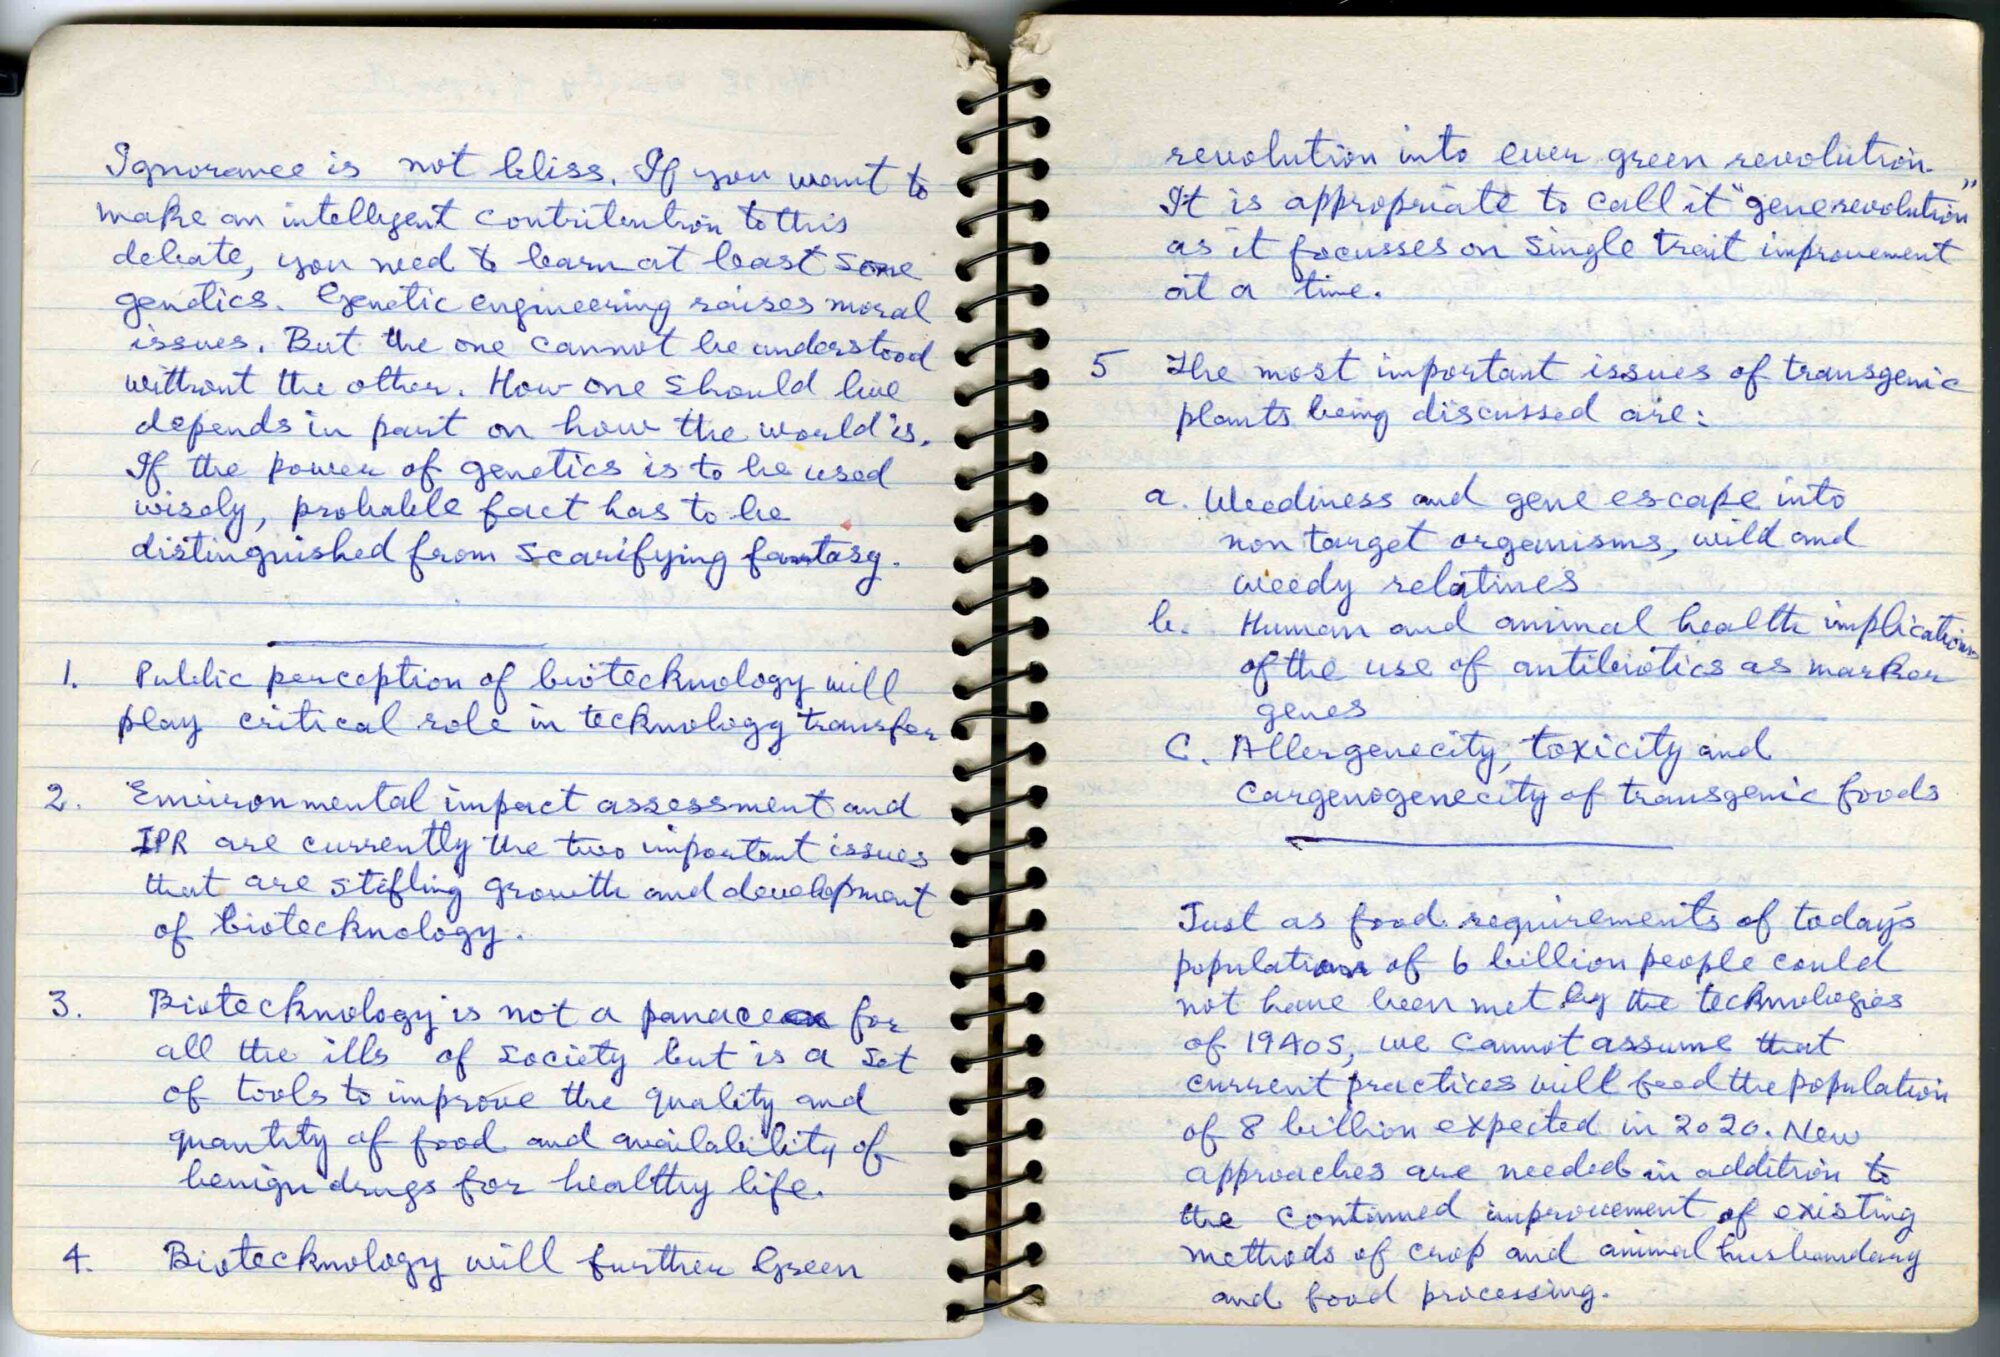 Image of two pages of a handwritten entry in a spiral bound notebook